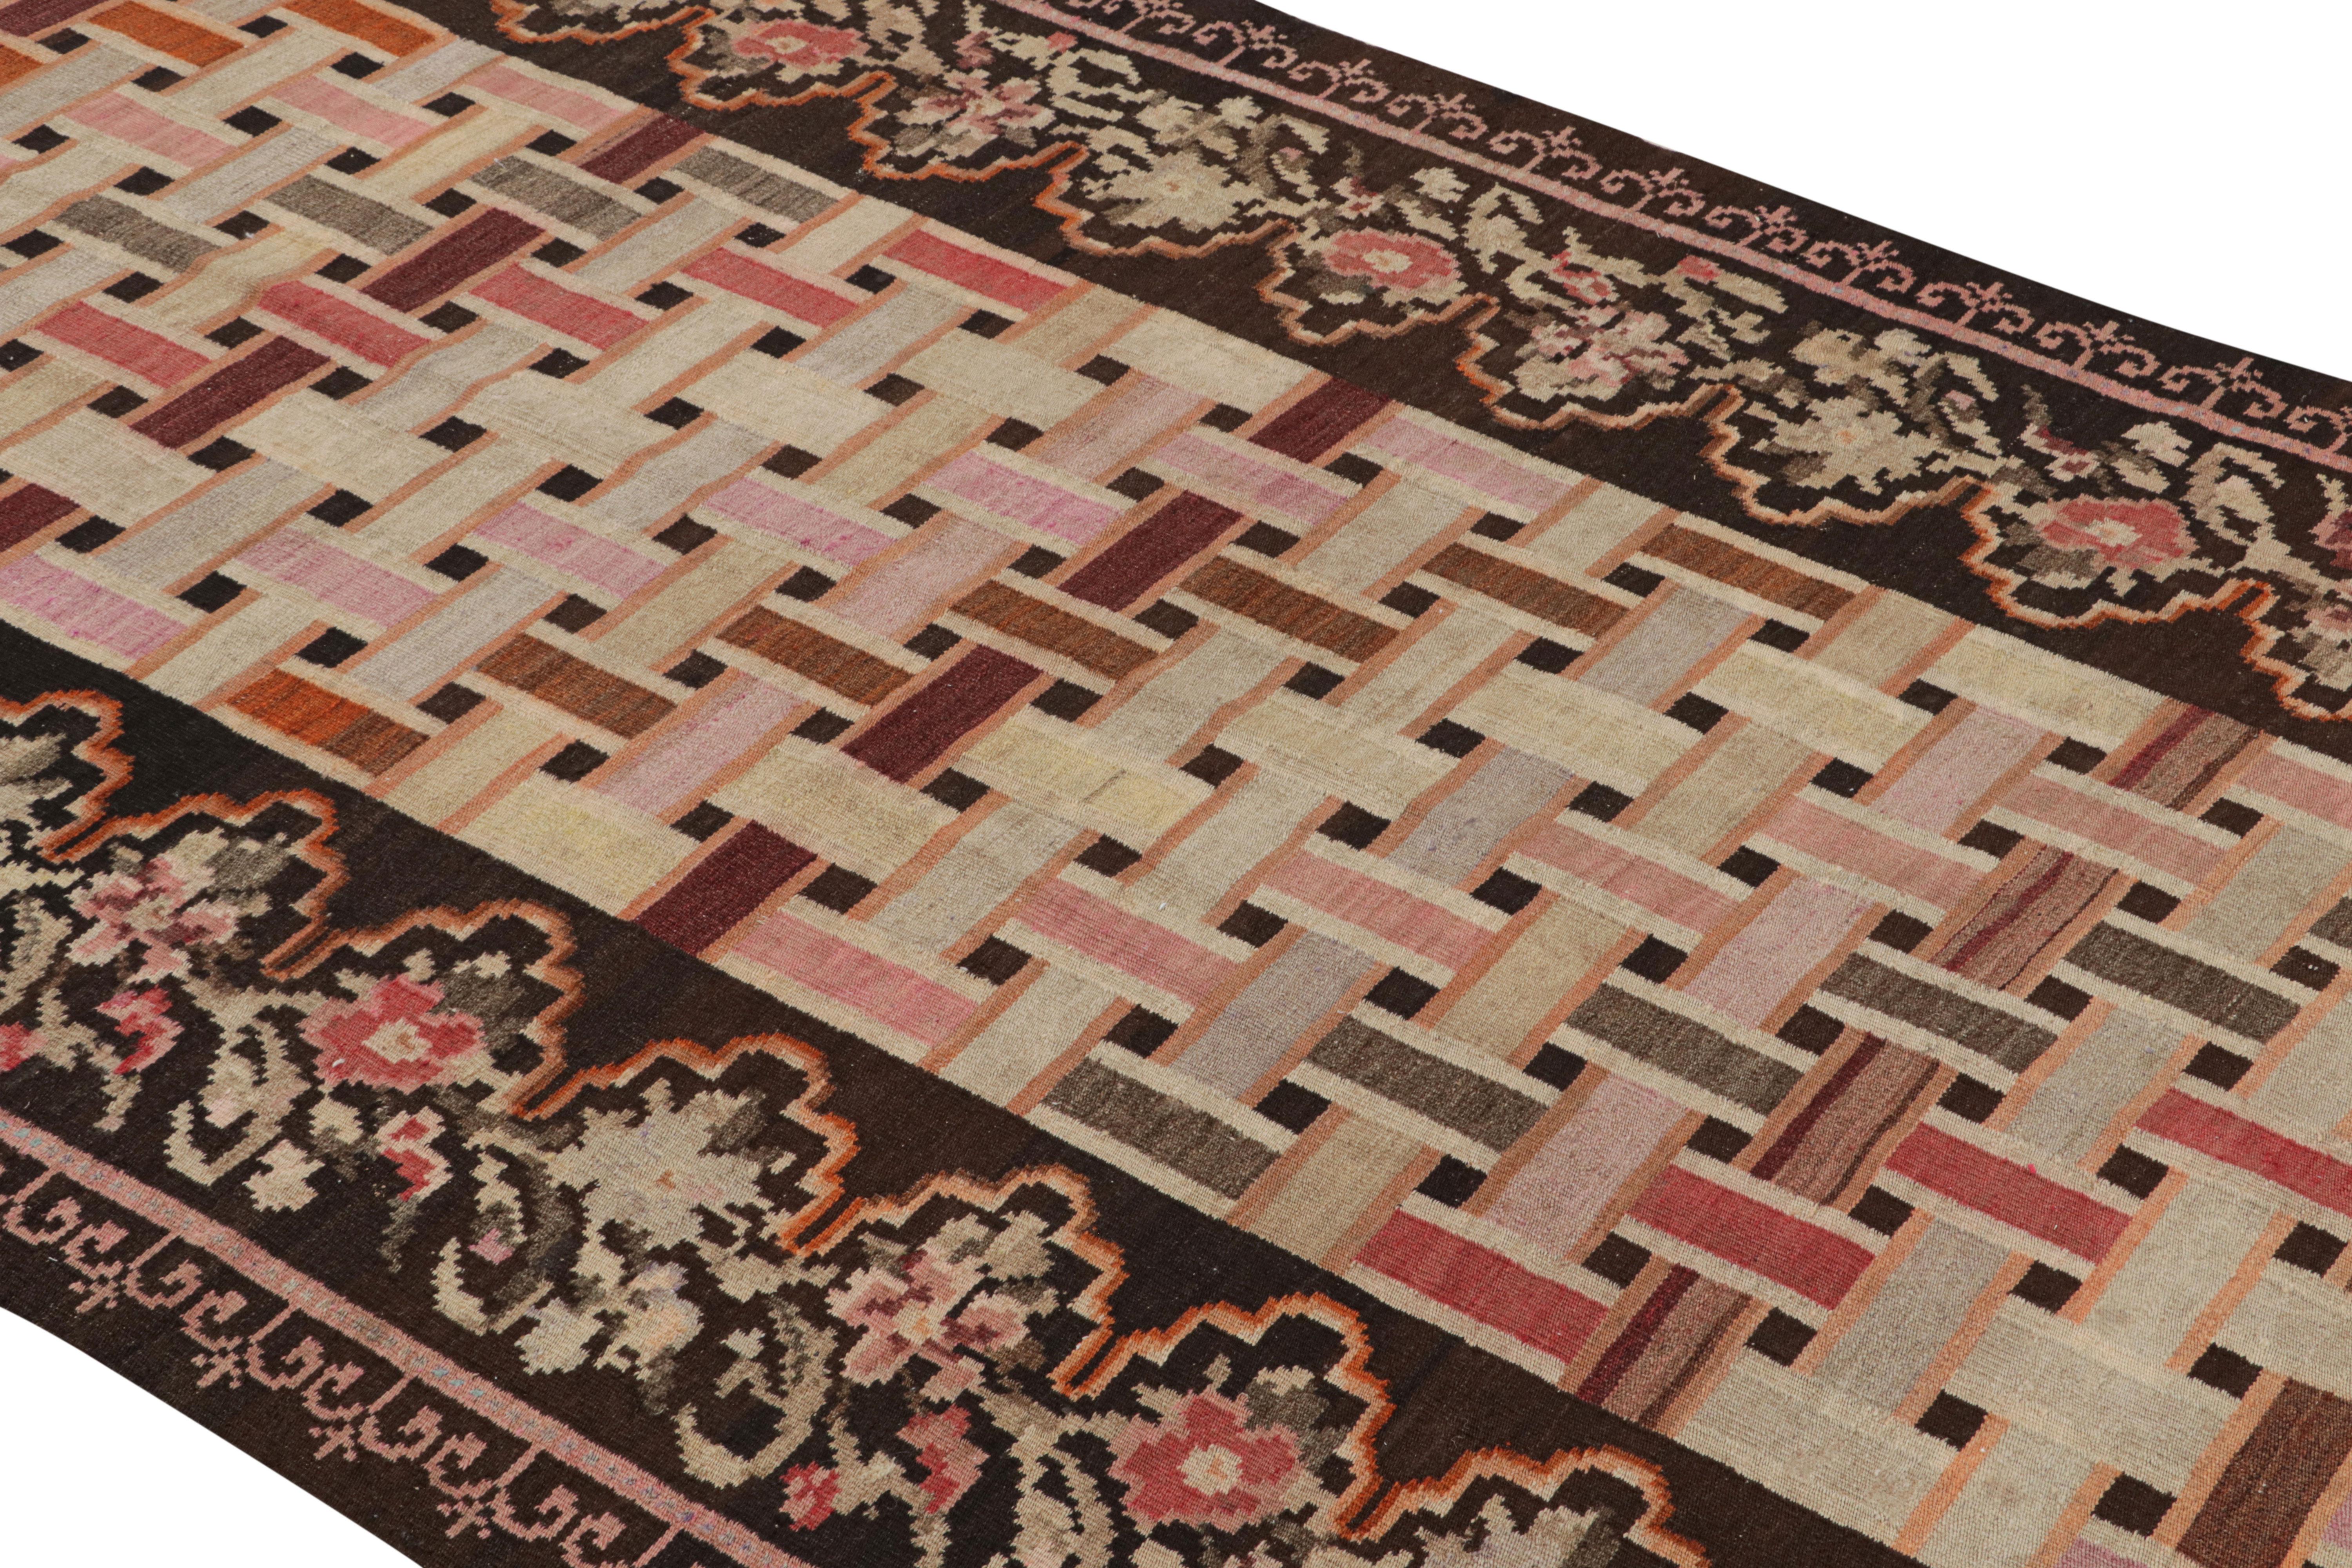 Handwoven in a wool flat-weave originating from Turkey circa 1950-1960, this vintage Kilim rug connotes a midcentury Bessarabian Kilim rug design in a play of rich Classic brown with European style pink, beige, and varied accenting hues in the